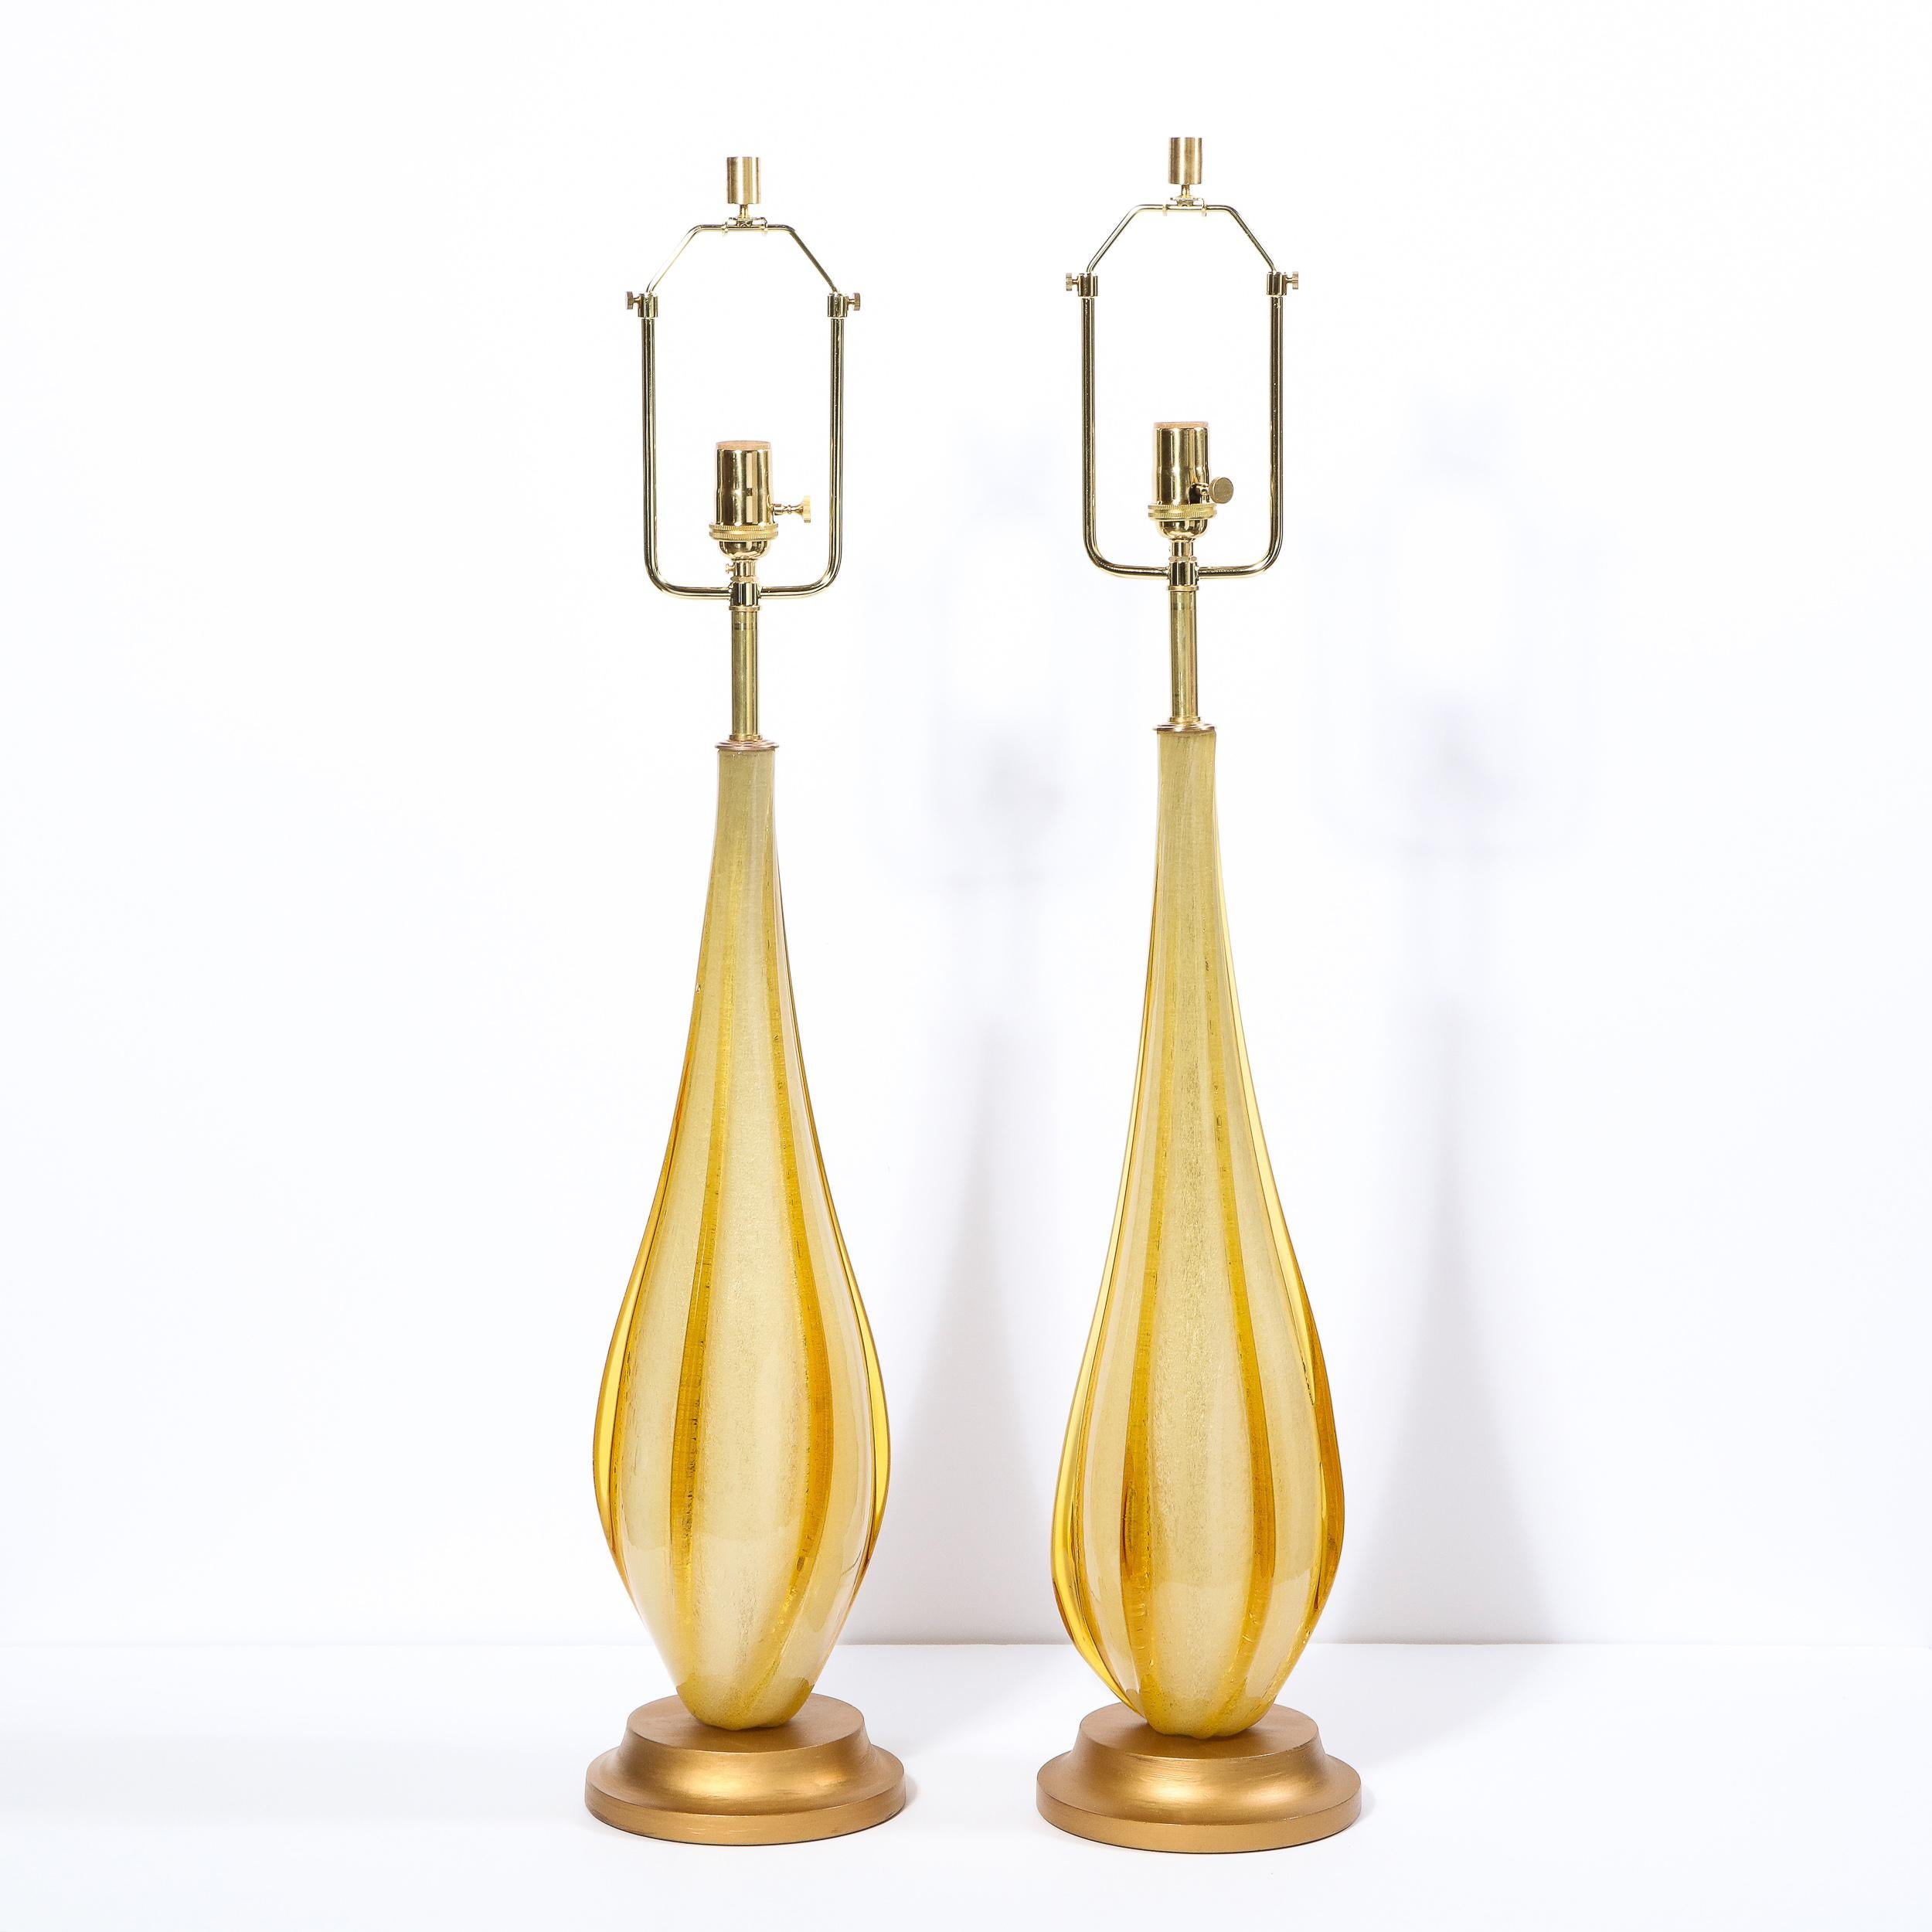 This stunning pair of Mid-Century Modern table lamps were realized in Murano, Italy- the island off the coast of Venice renowned for centuries for its superlative glass production- circa 1960. They features honey hued tear drop bodies with raised